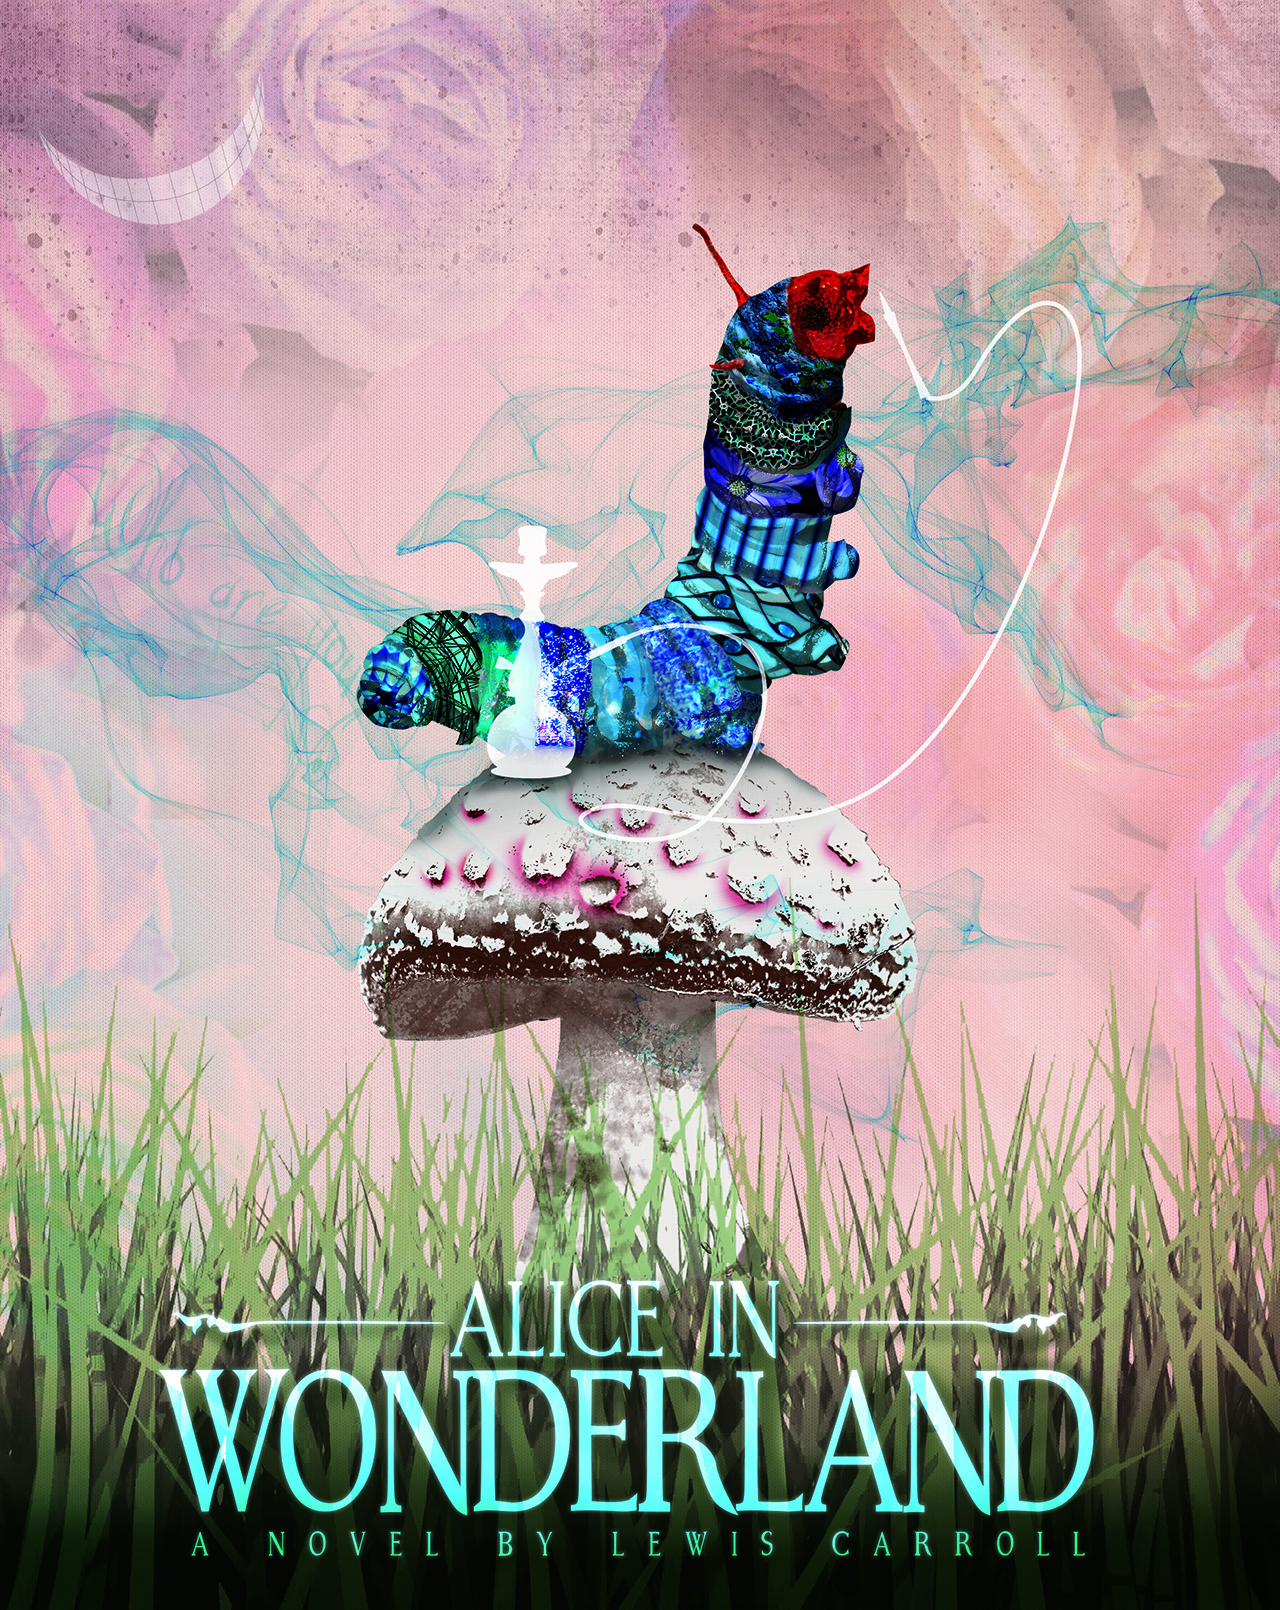 Andrea Taylor | "Alice in Wonderland" by Lewis Carroll